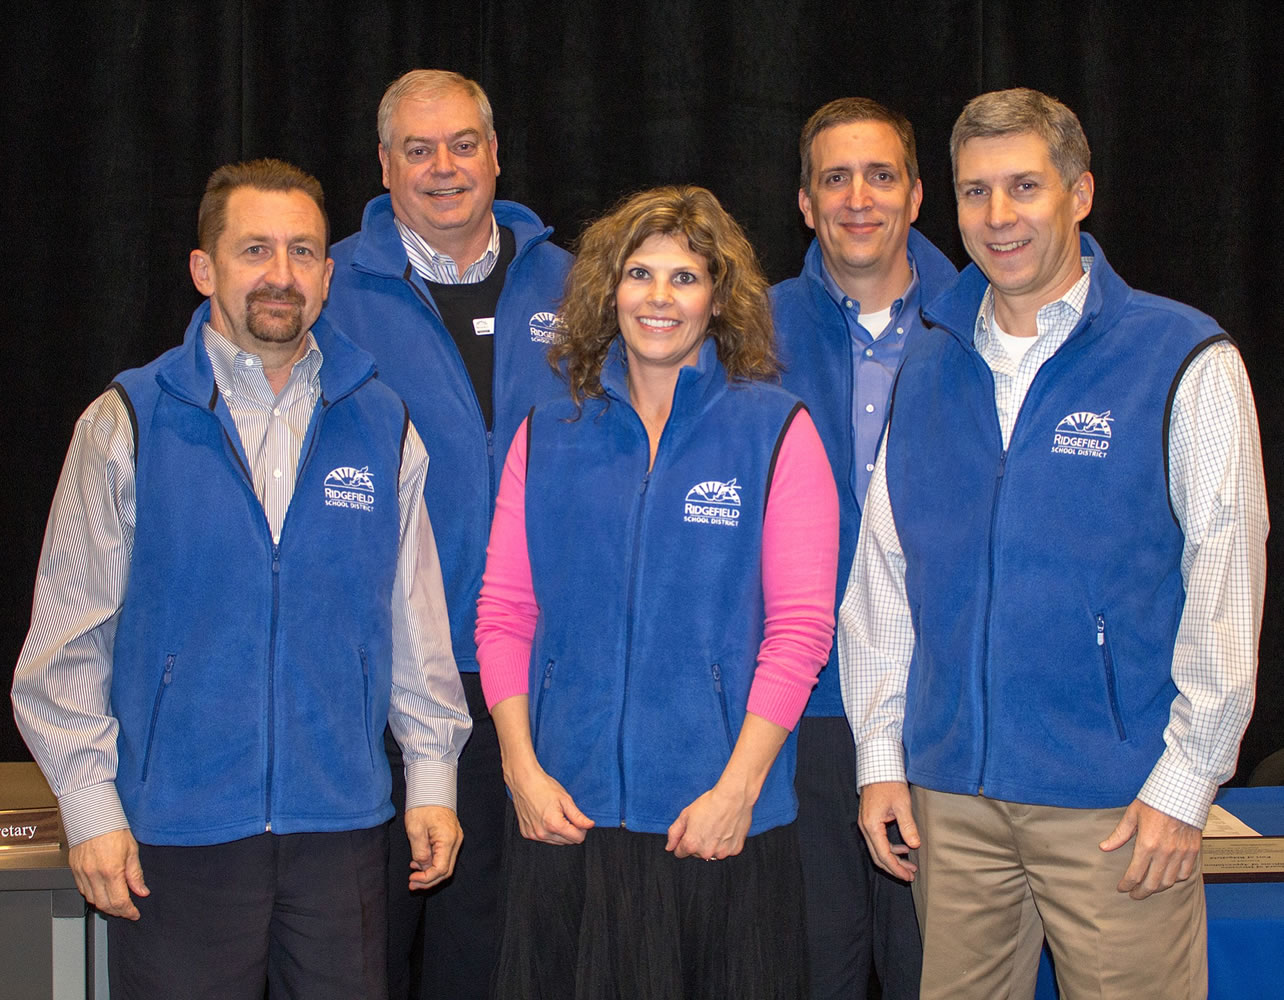 Ridgefield: In honor of School Board Recognition Month, the Ridgefield School District recently honored its five Board Directors: from left, Scott Gullickson, Jeff Vigue, Becky Greenwald, Joseph Vance and Steven Radosevich.